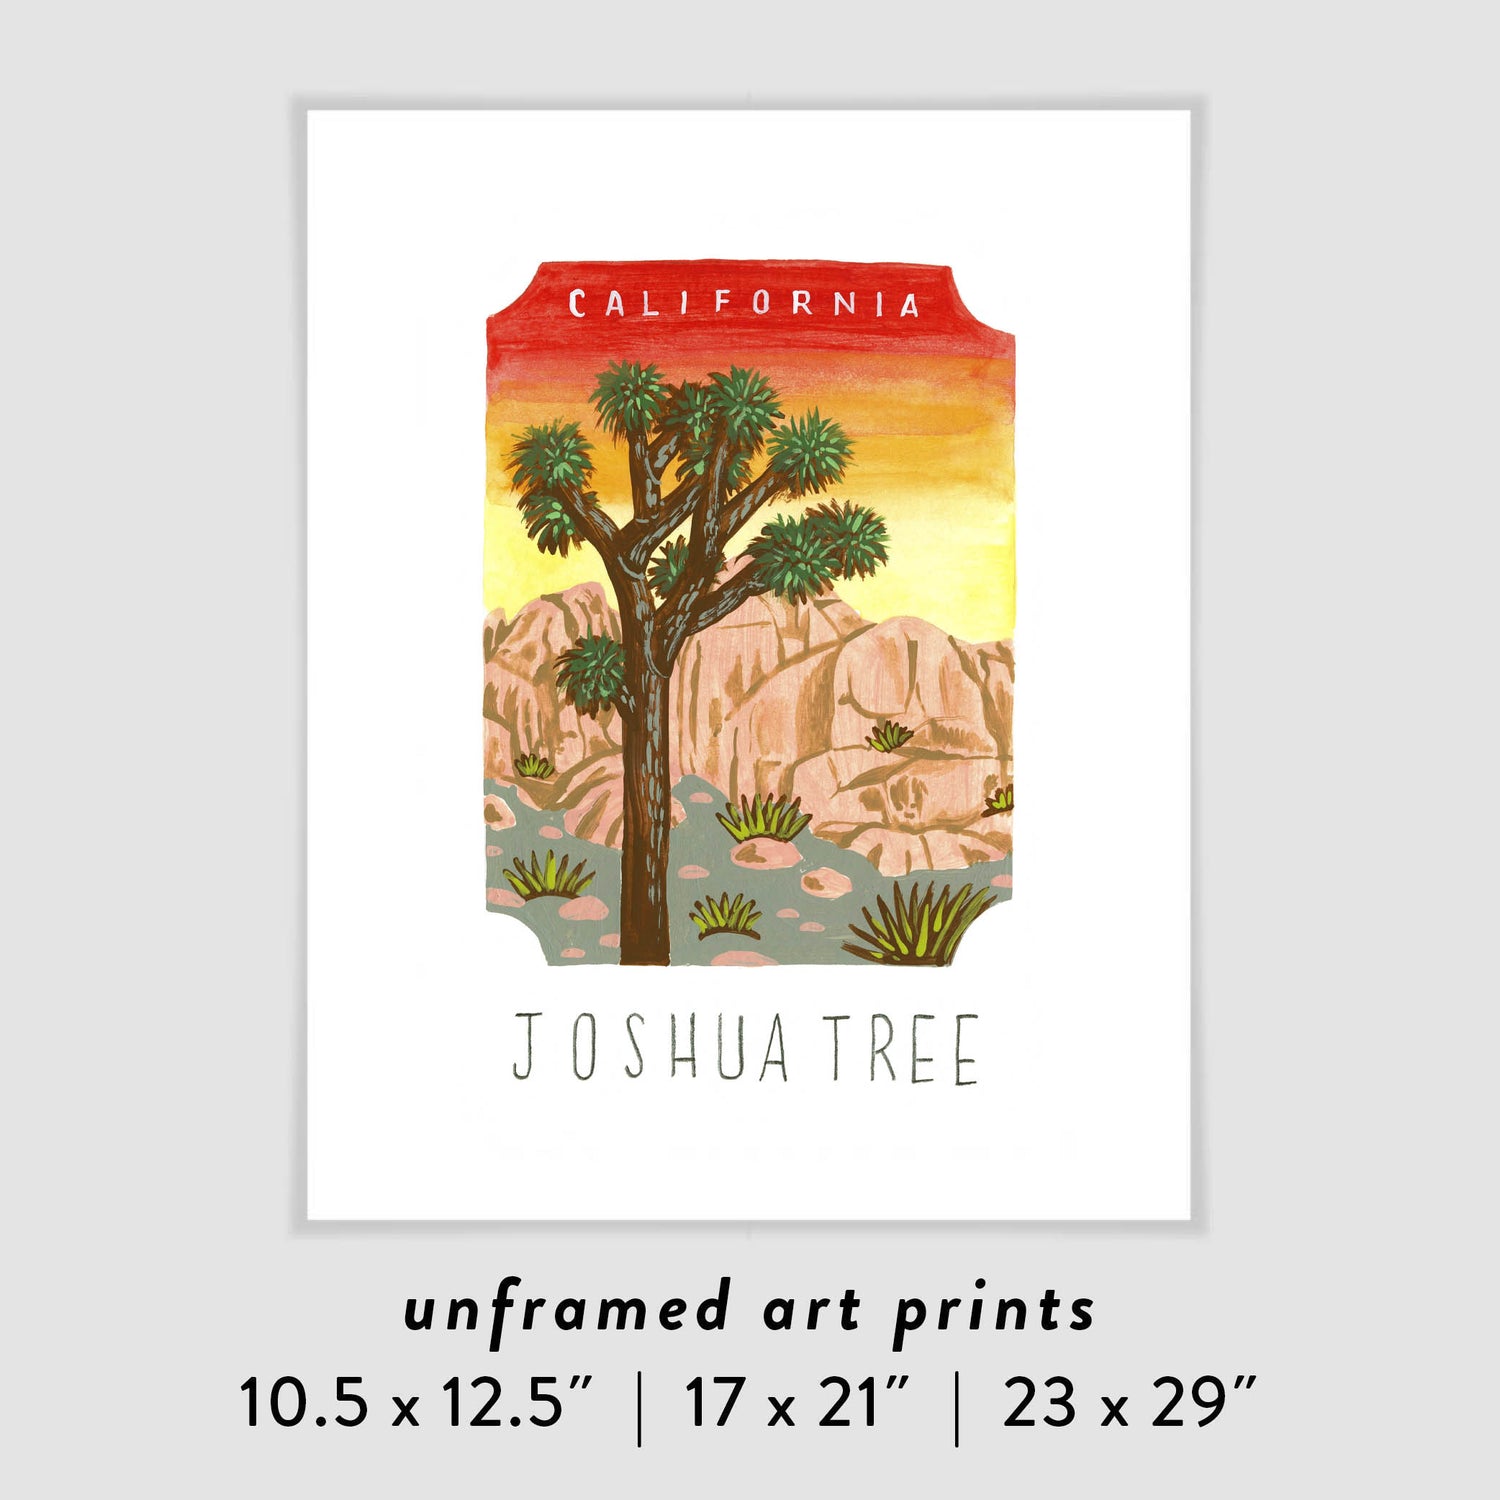 Joshua Tree National Park art print with Coachella Valley, Mojave Desert, rock formations, and cactus garden; trendy illustration by Angela Staehling